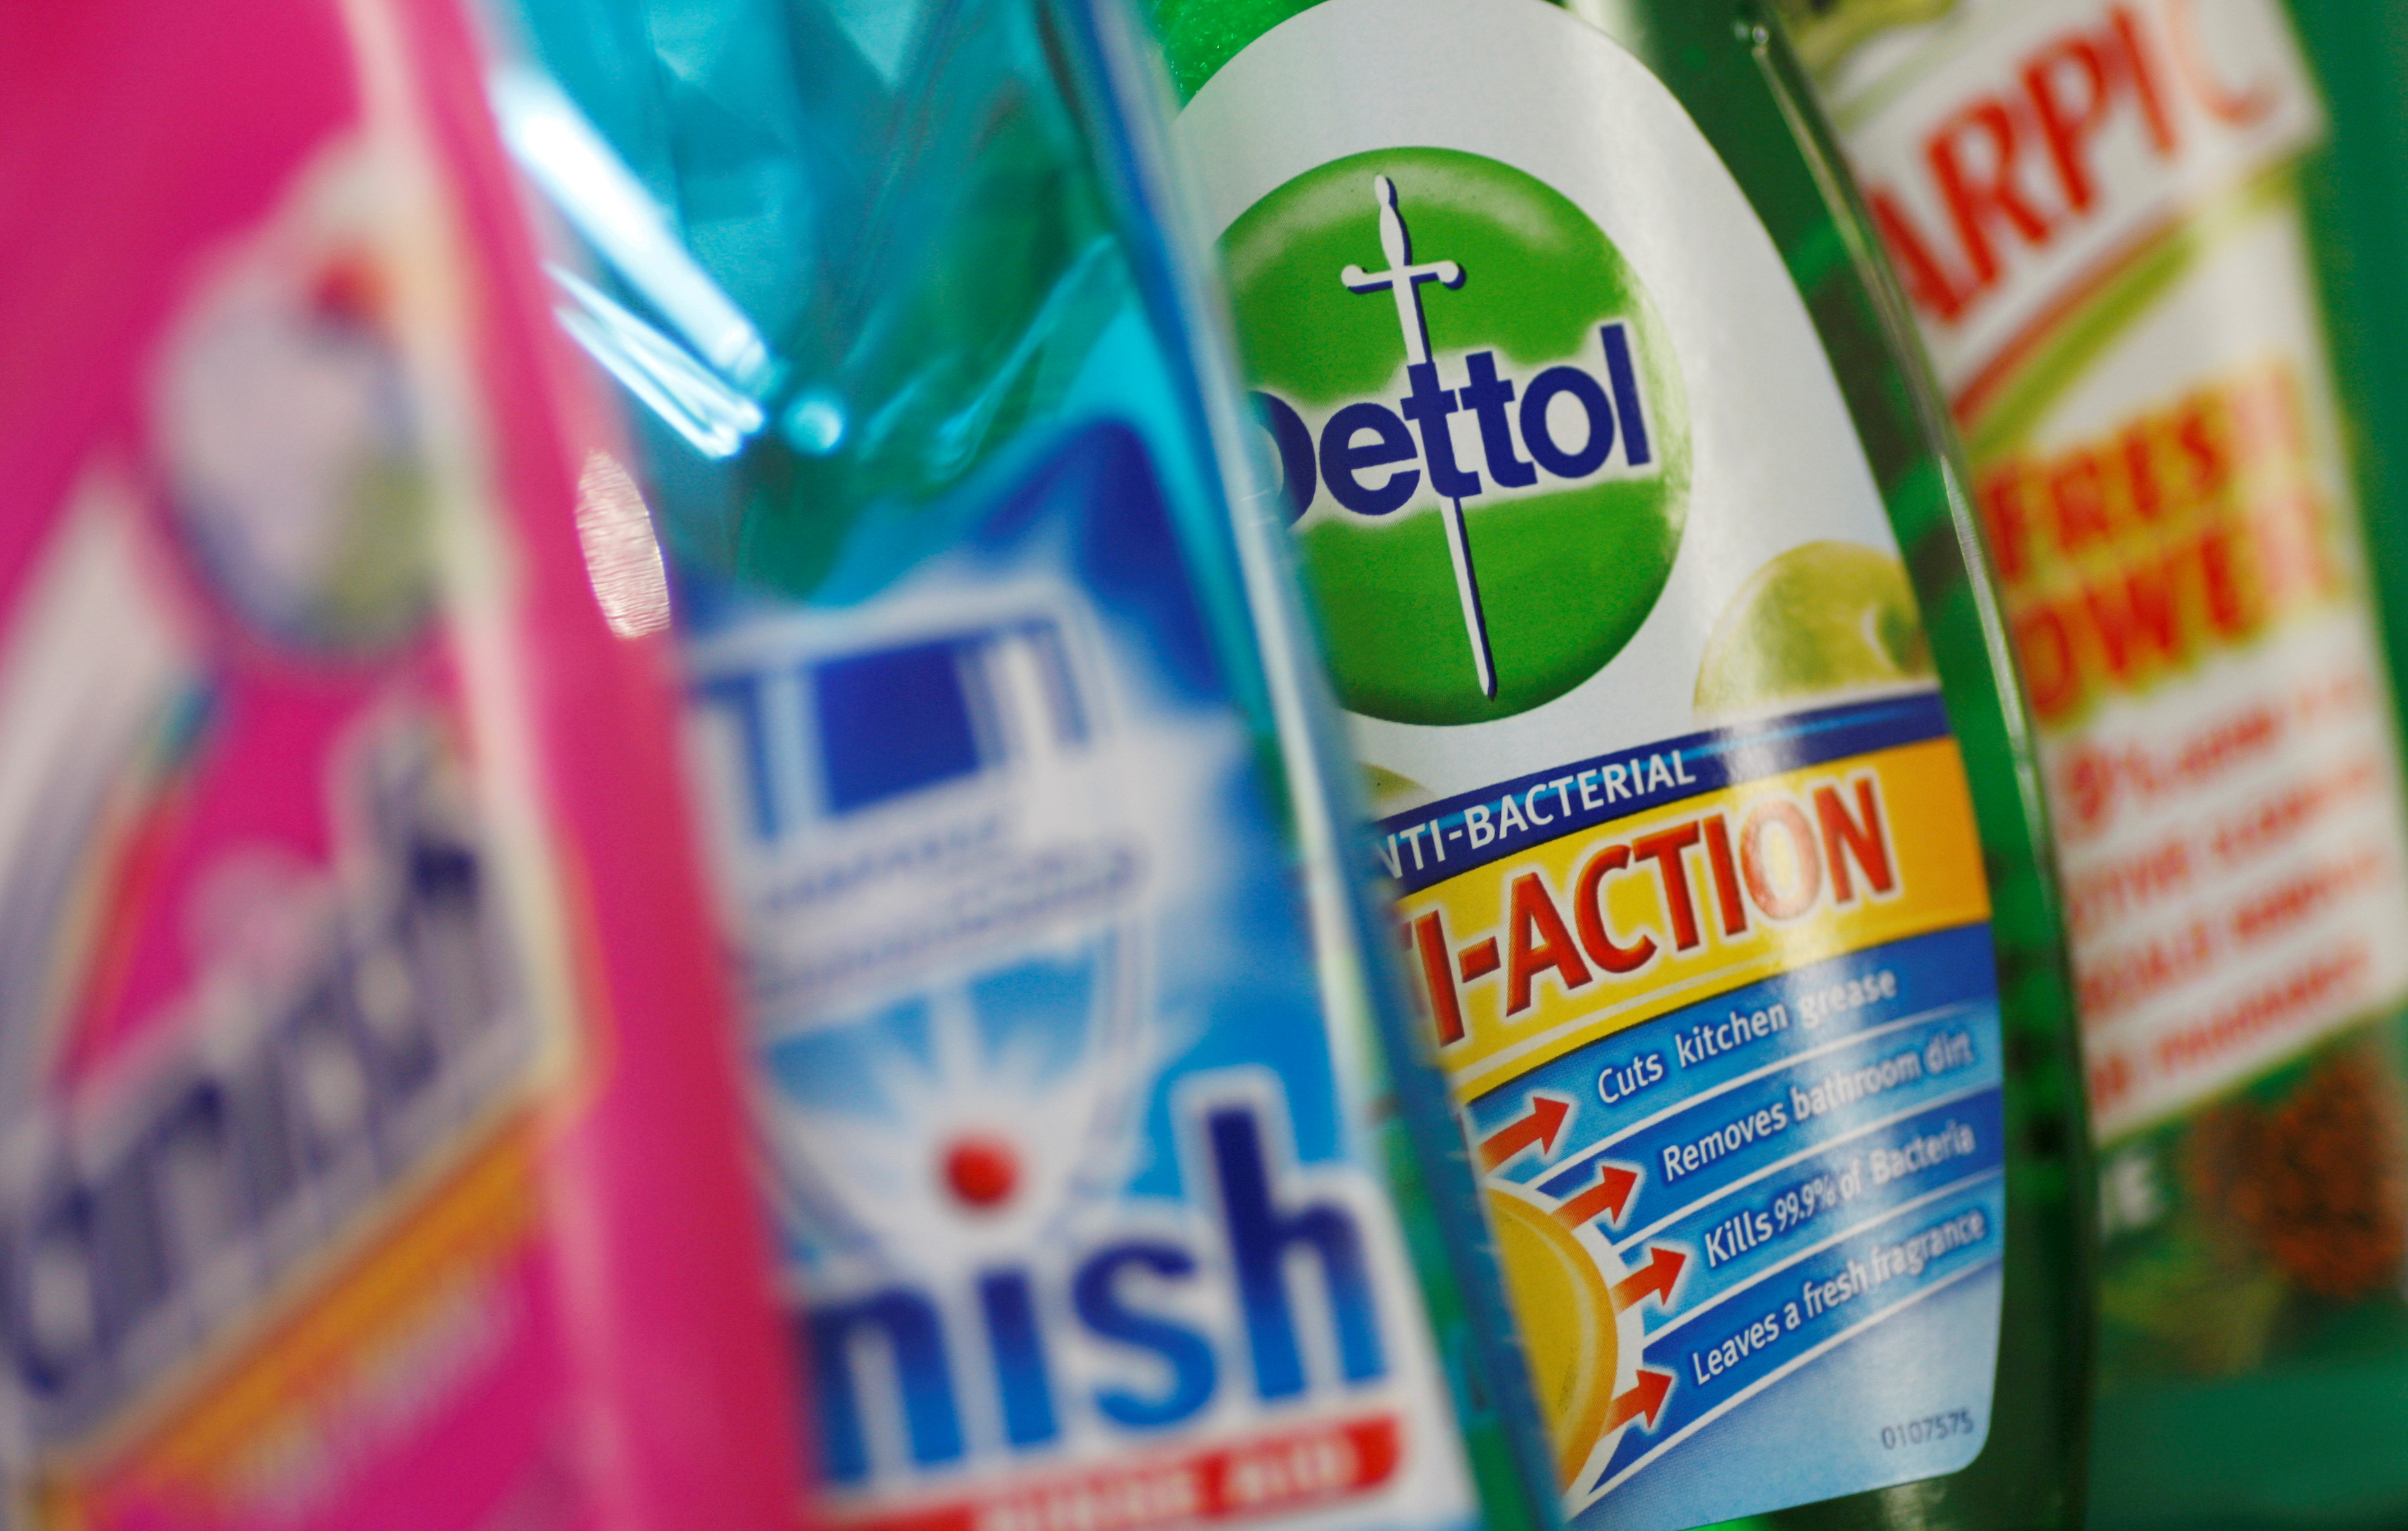 Products produced by Reckitt Benckiser are seen in London, Britain,  February 12, 2008.   REUTERS/Stephen Hird